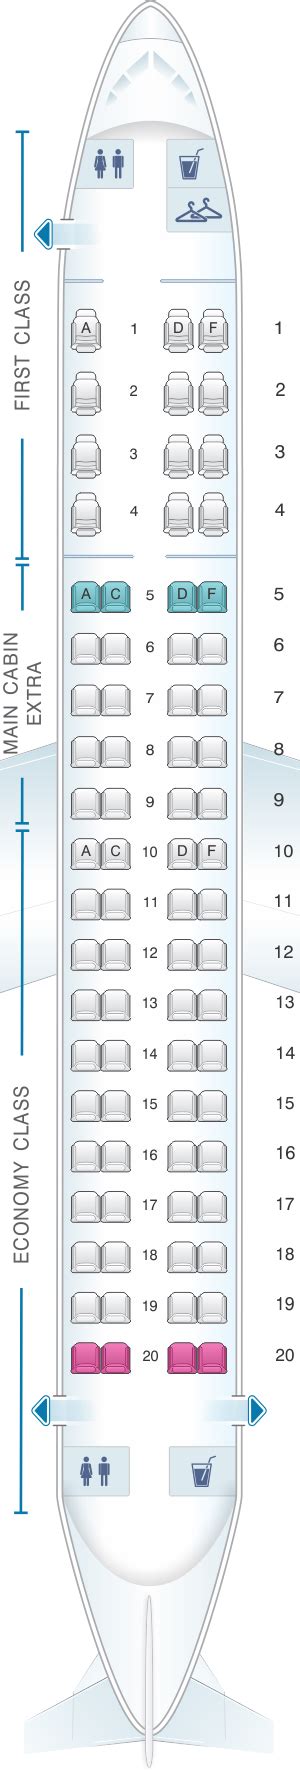 Embraer 175 american airlines seat map. For your next American Airlines flight, use this seating chart to get the most comfortable seats, legroom, ... American Airlines Seat Maps. Overview; Planes & Seat Maps. Airbus A319 (319) Airbus A320 (320) ... Embraer ERJ-175 (E75) Layout 1; Embraer ERJ-175 (E75) Layout 2; Check-in; Baggage; ... 